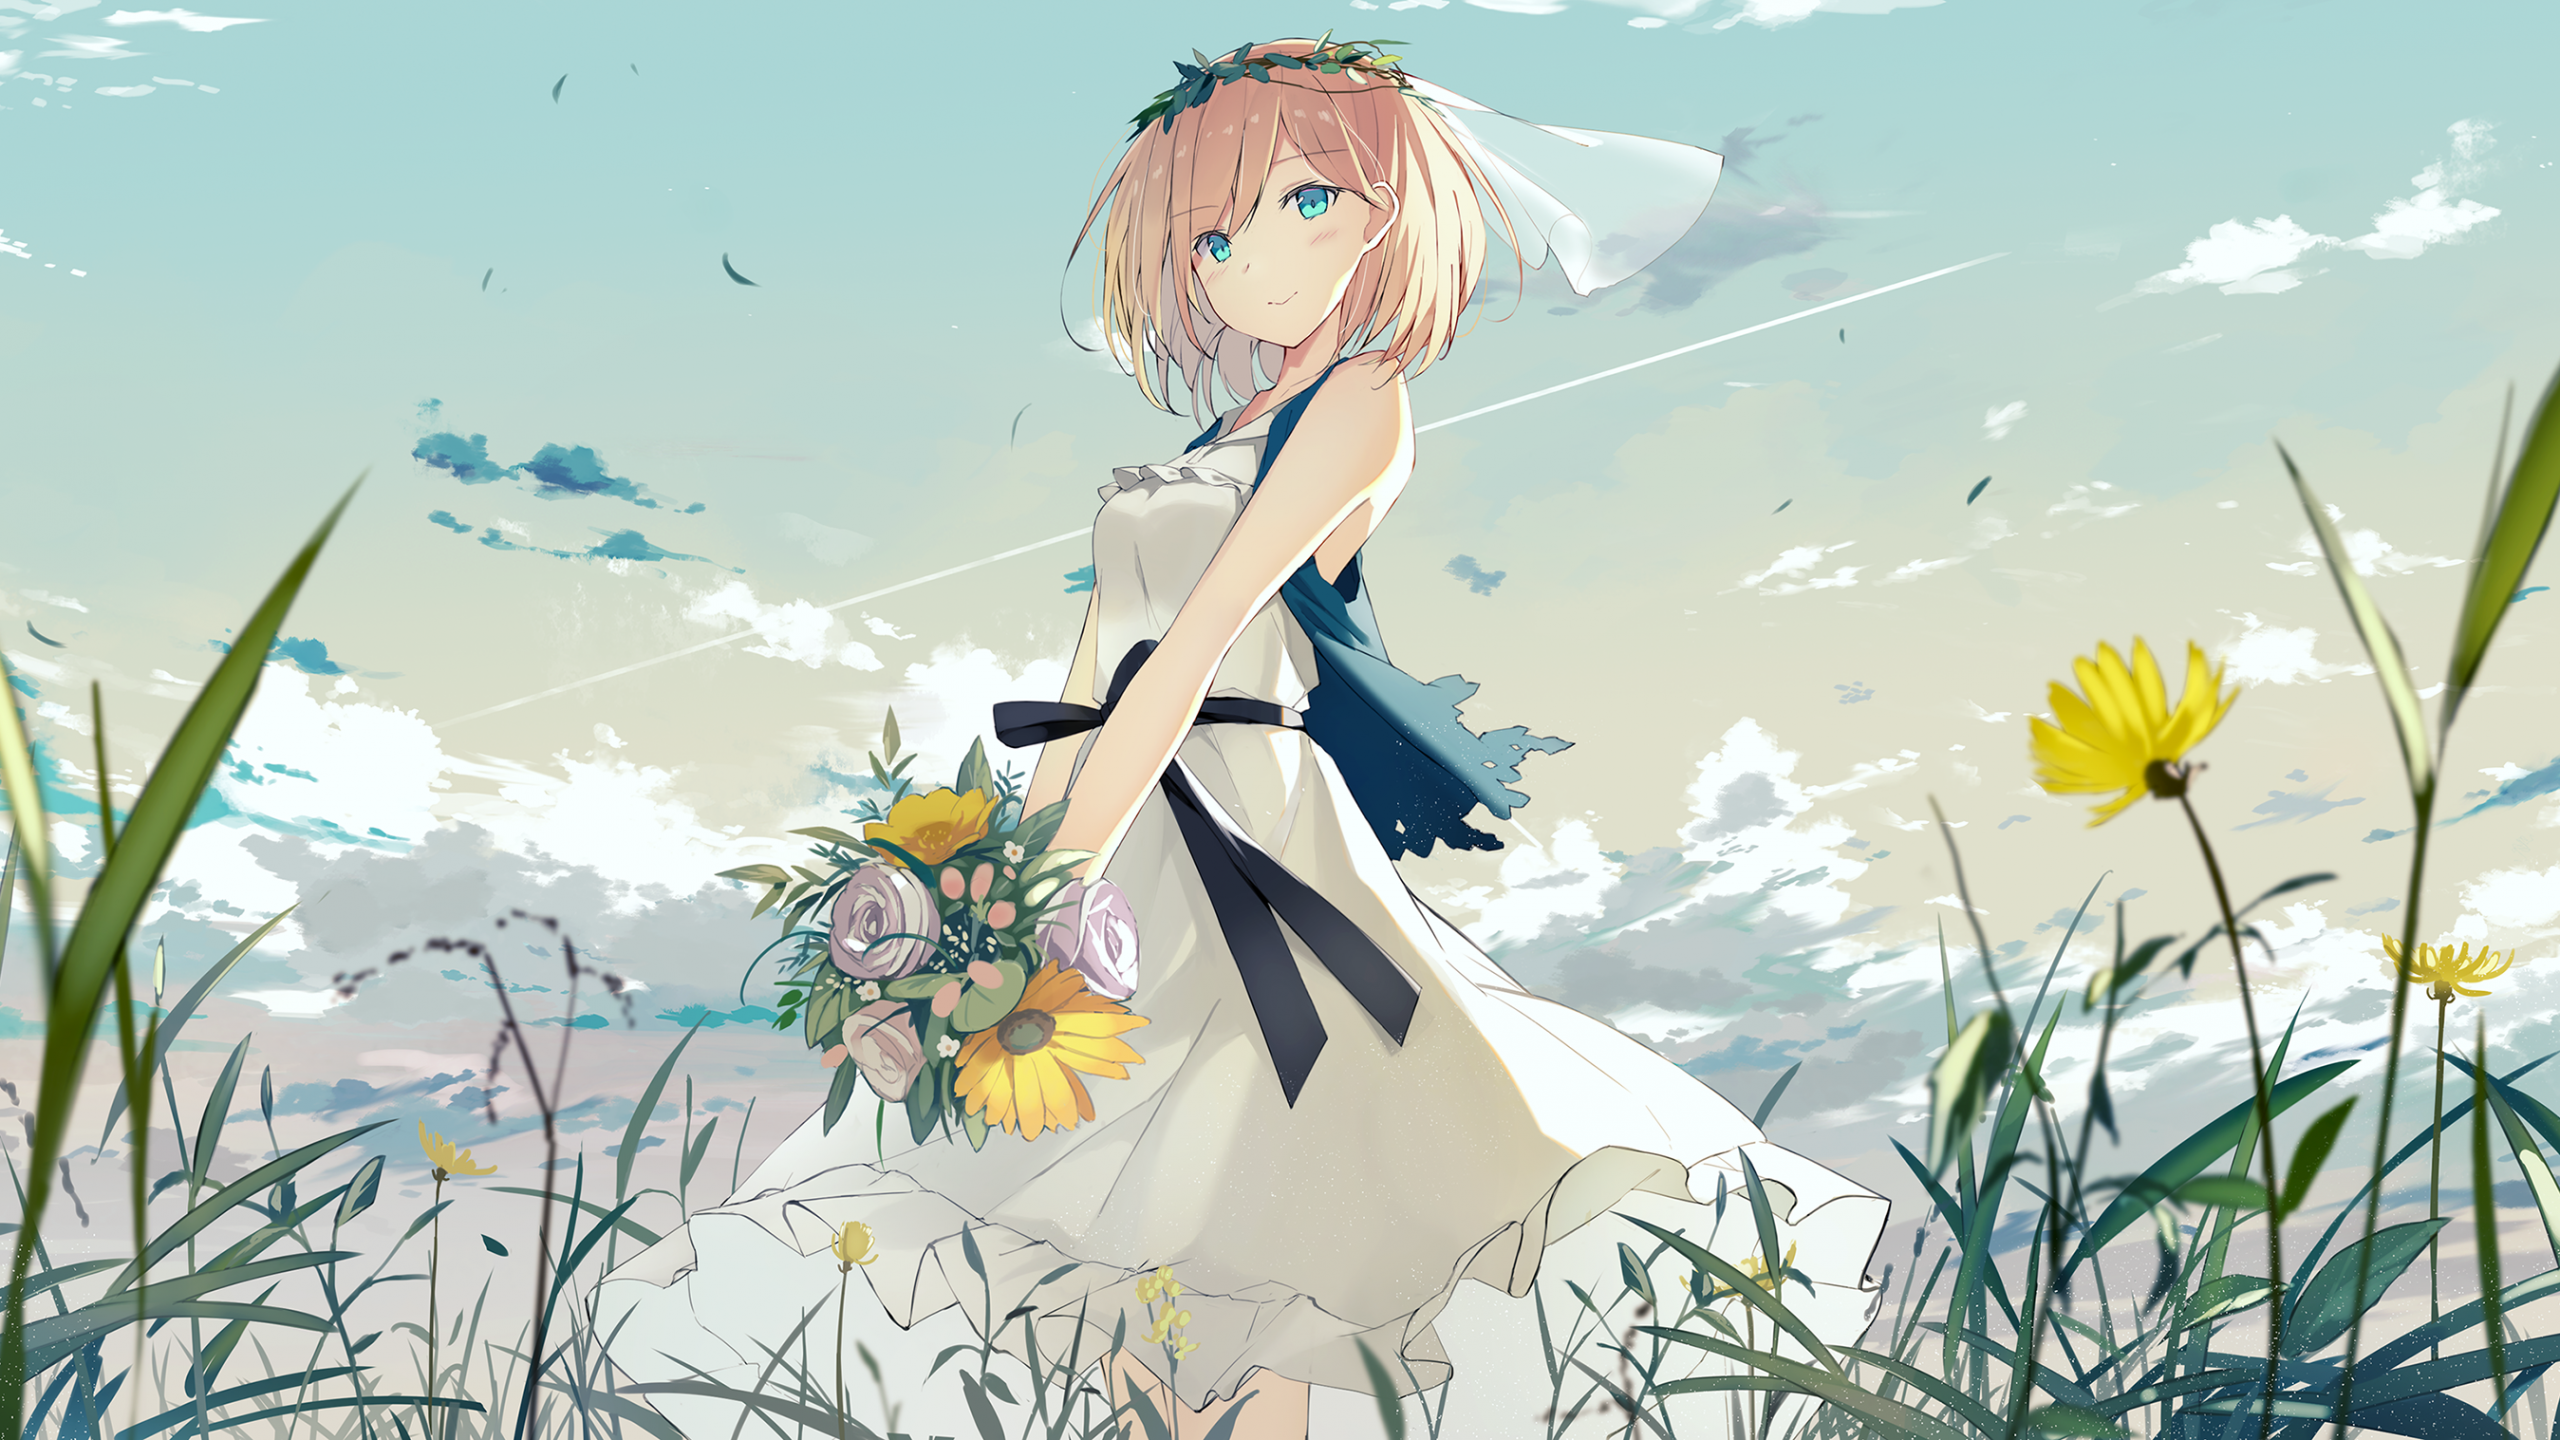 Download 2560x1440 Anime Girl, Short Hair, Yellow Flowers, Clouds, White Dress Wallpaper for iMac 27 inch